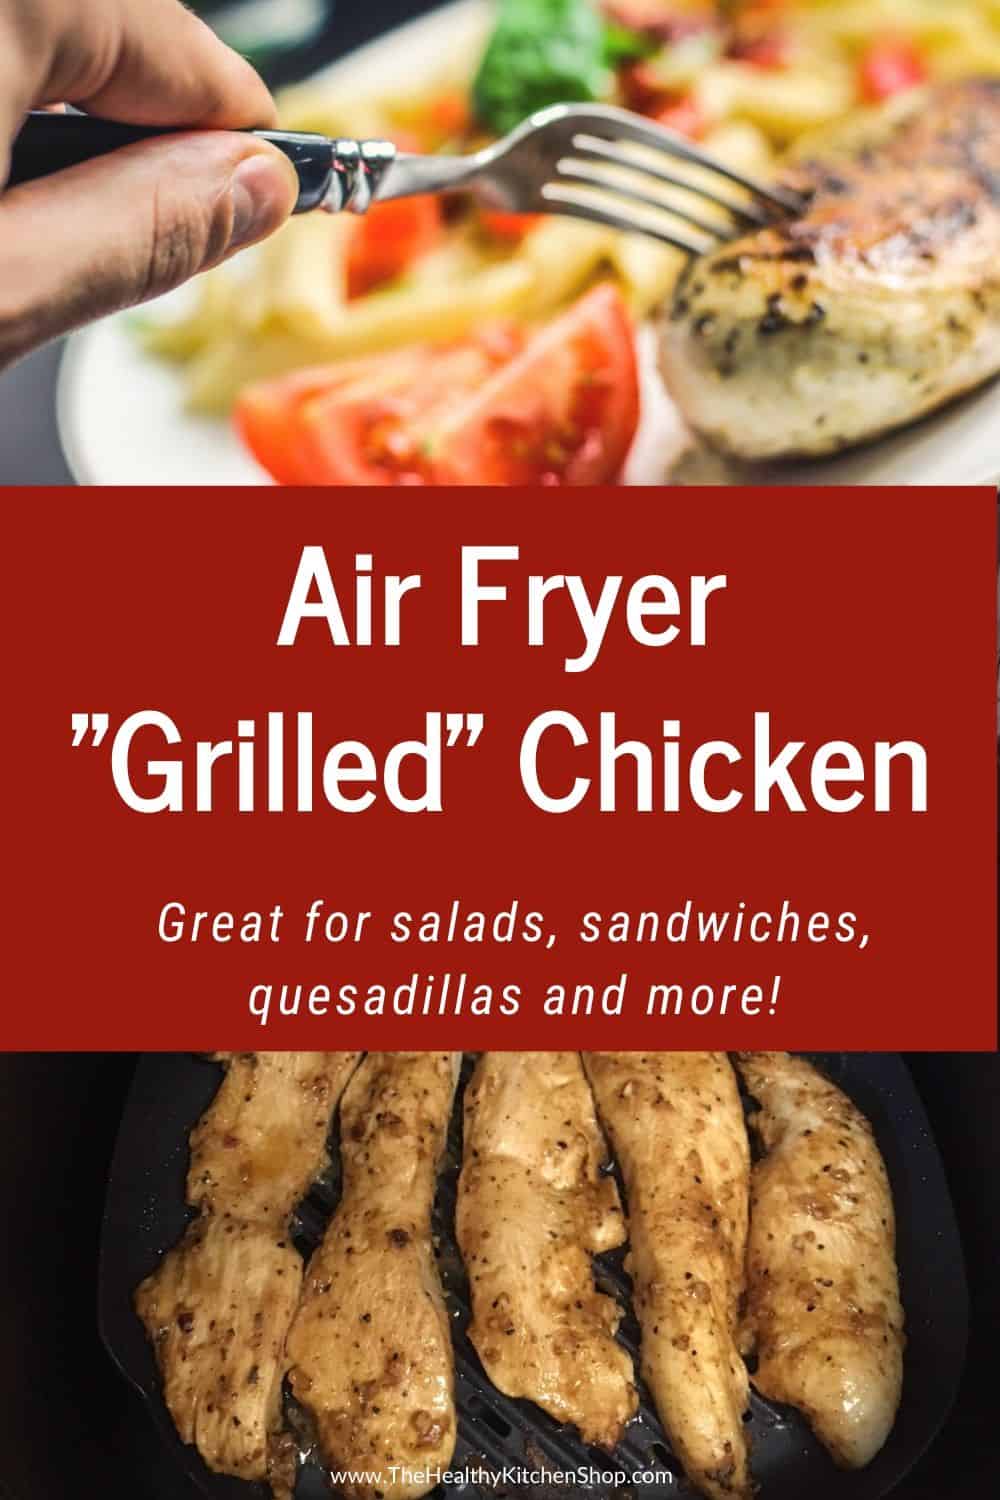 Air Fryer Grilled Chicken - TheHealthyKitchenShop.com